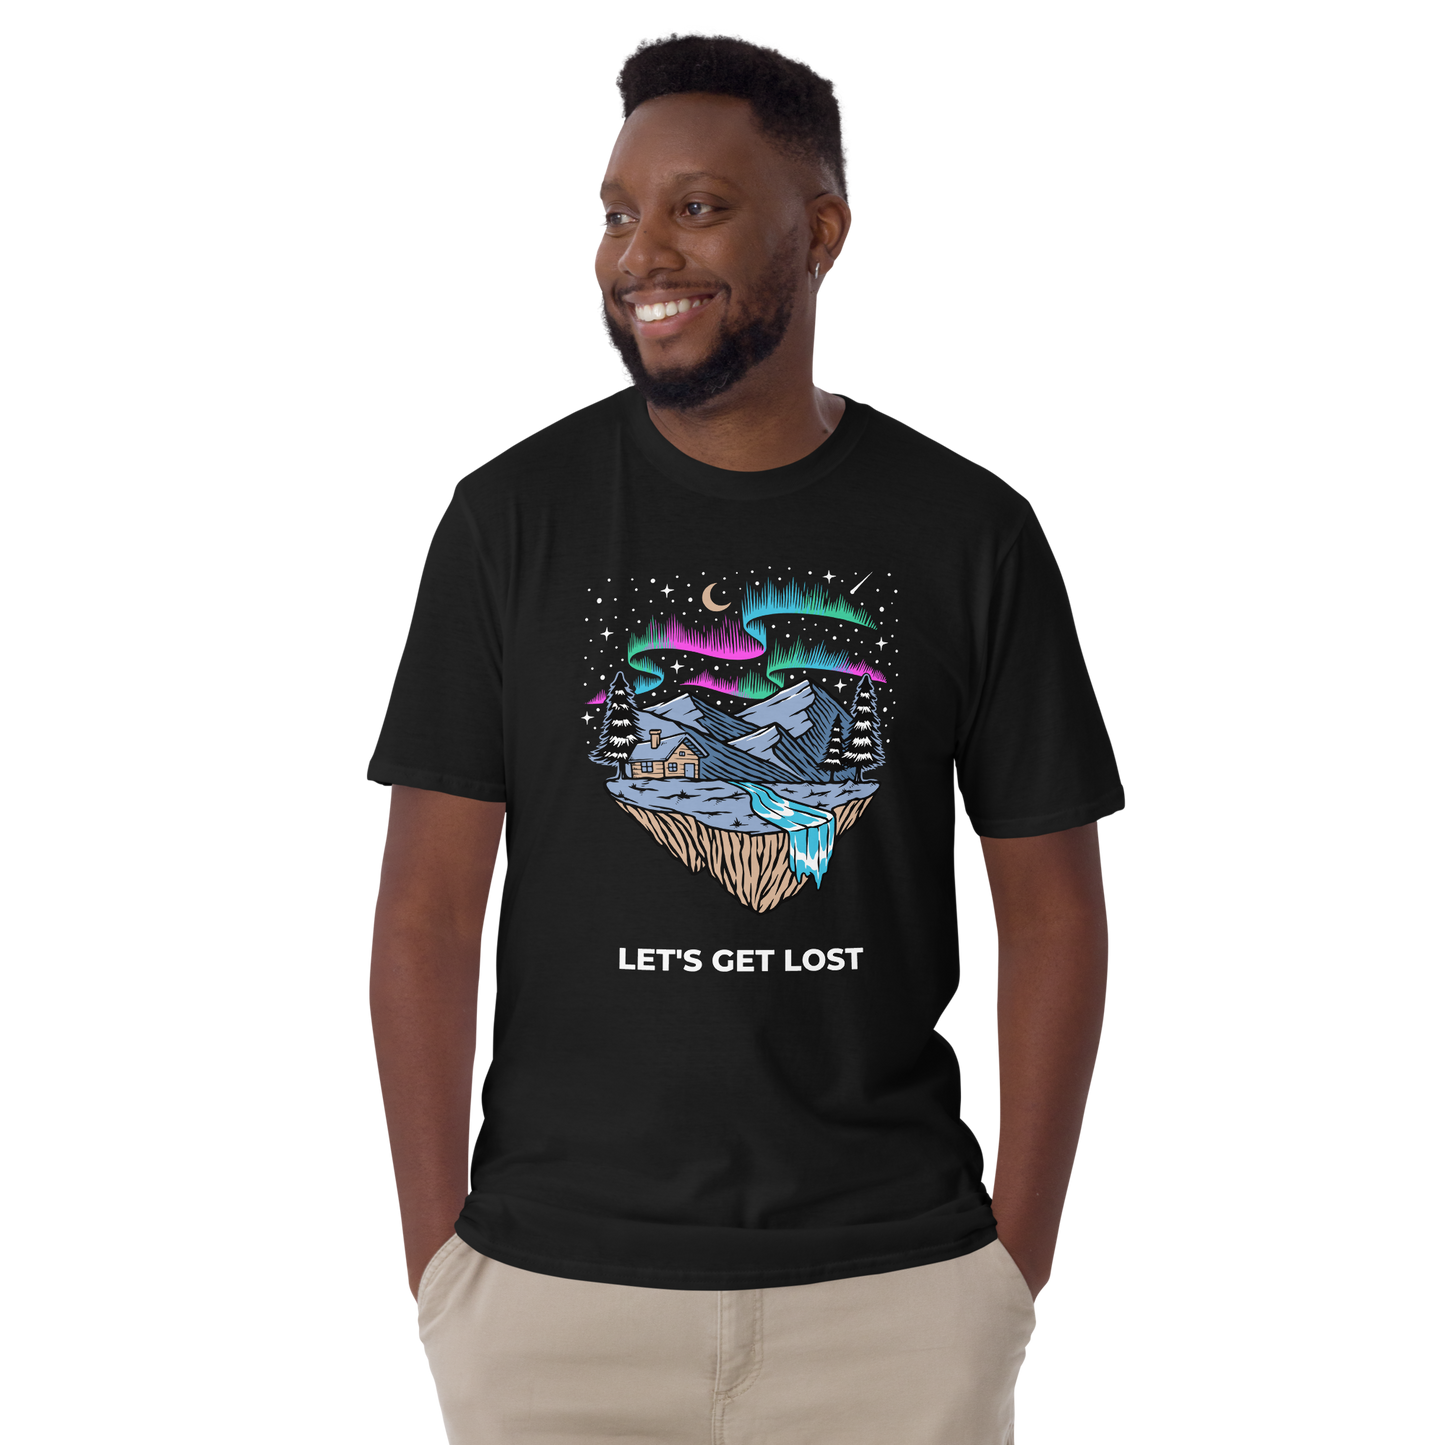 Smiling man wearing a Black Let's Get Lost T-Shirt featuring a mesmerizing night sky, adorned with stars and aurora borealis graphic on the chest - Cool Graphic Northern Lights T-Shirts - Boozy Fox